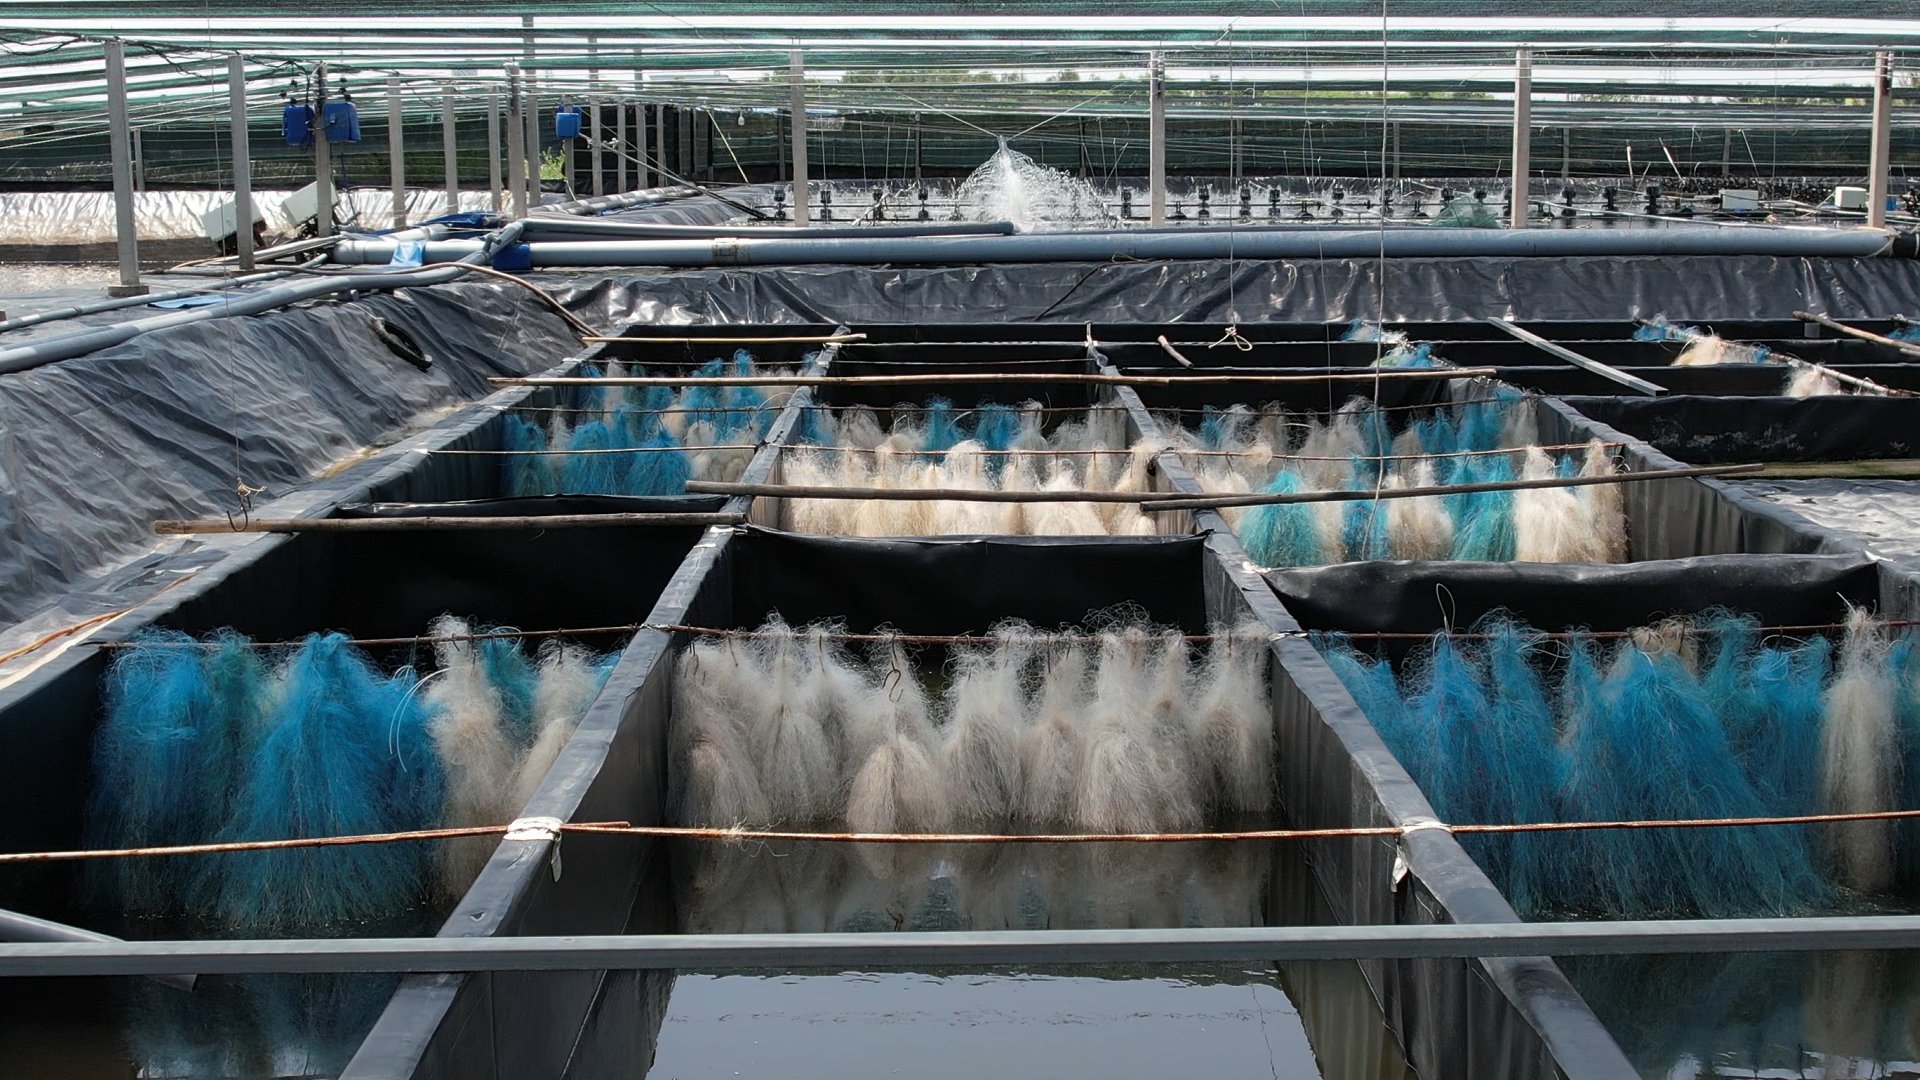 GrowMax has successfully developed the method of 'Reaching high-tech shrimp with water circulation' with numerous exceptional benefits, such as: low investment costs, no use of antibiotics during the farming process, and the production of high-quality products. Shrimp are hygienic and prevent disease, etc. 